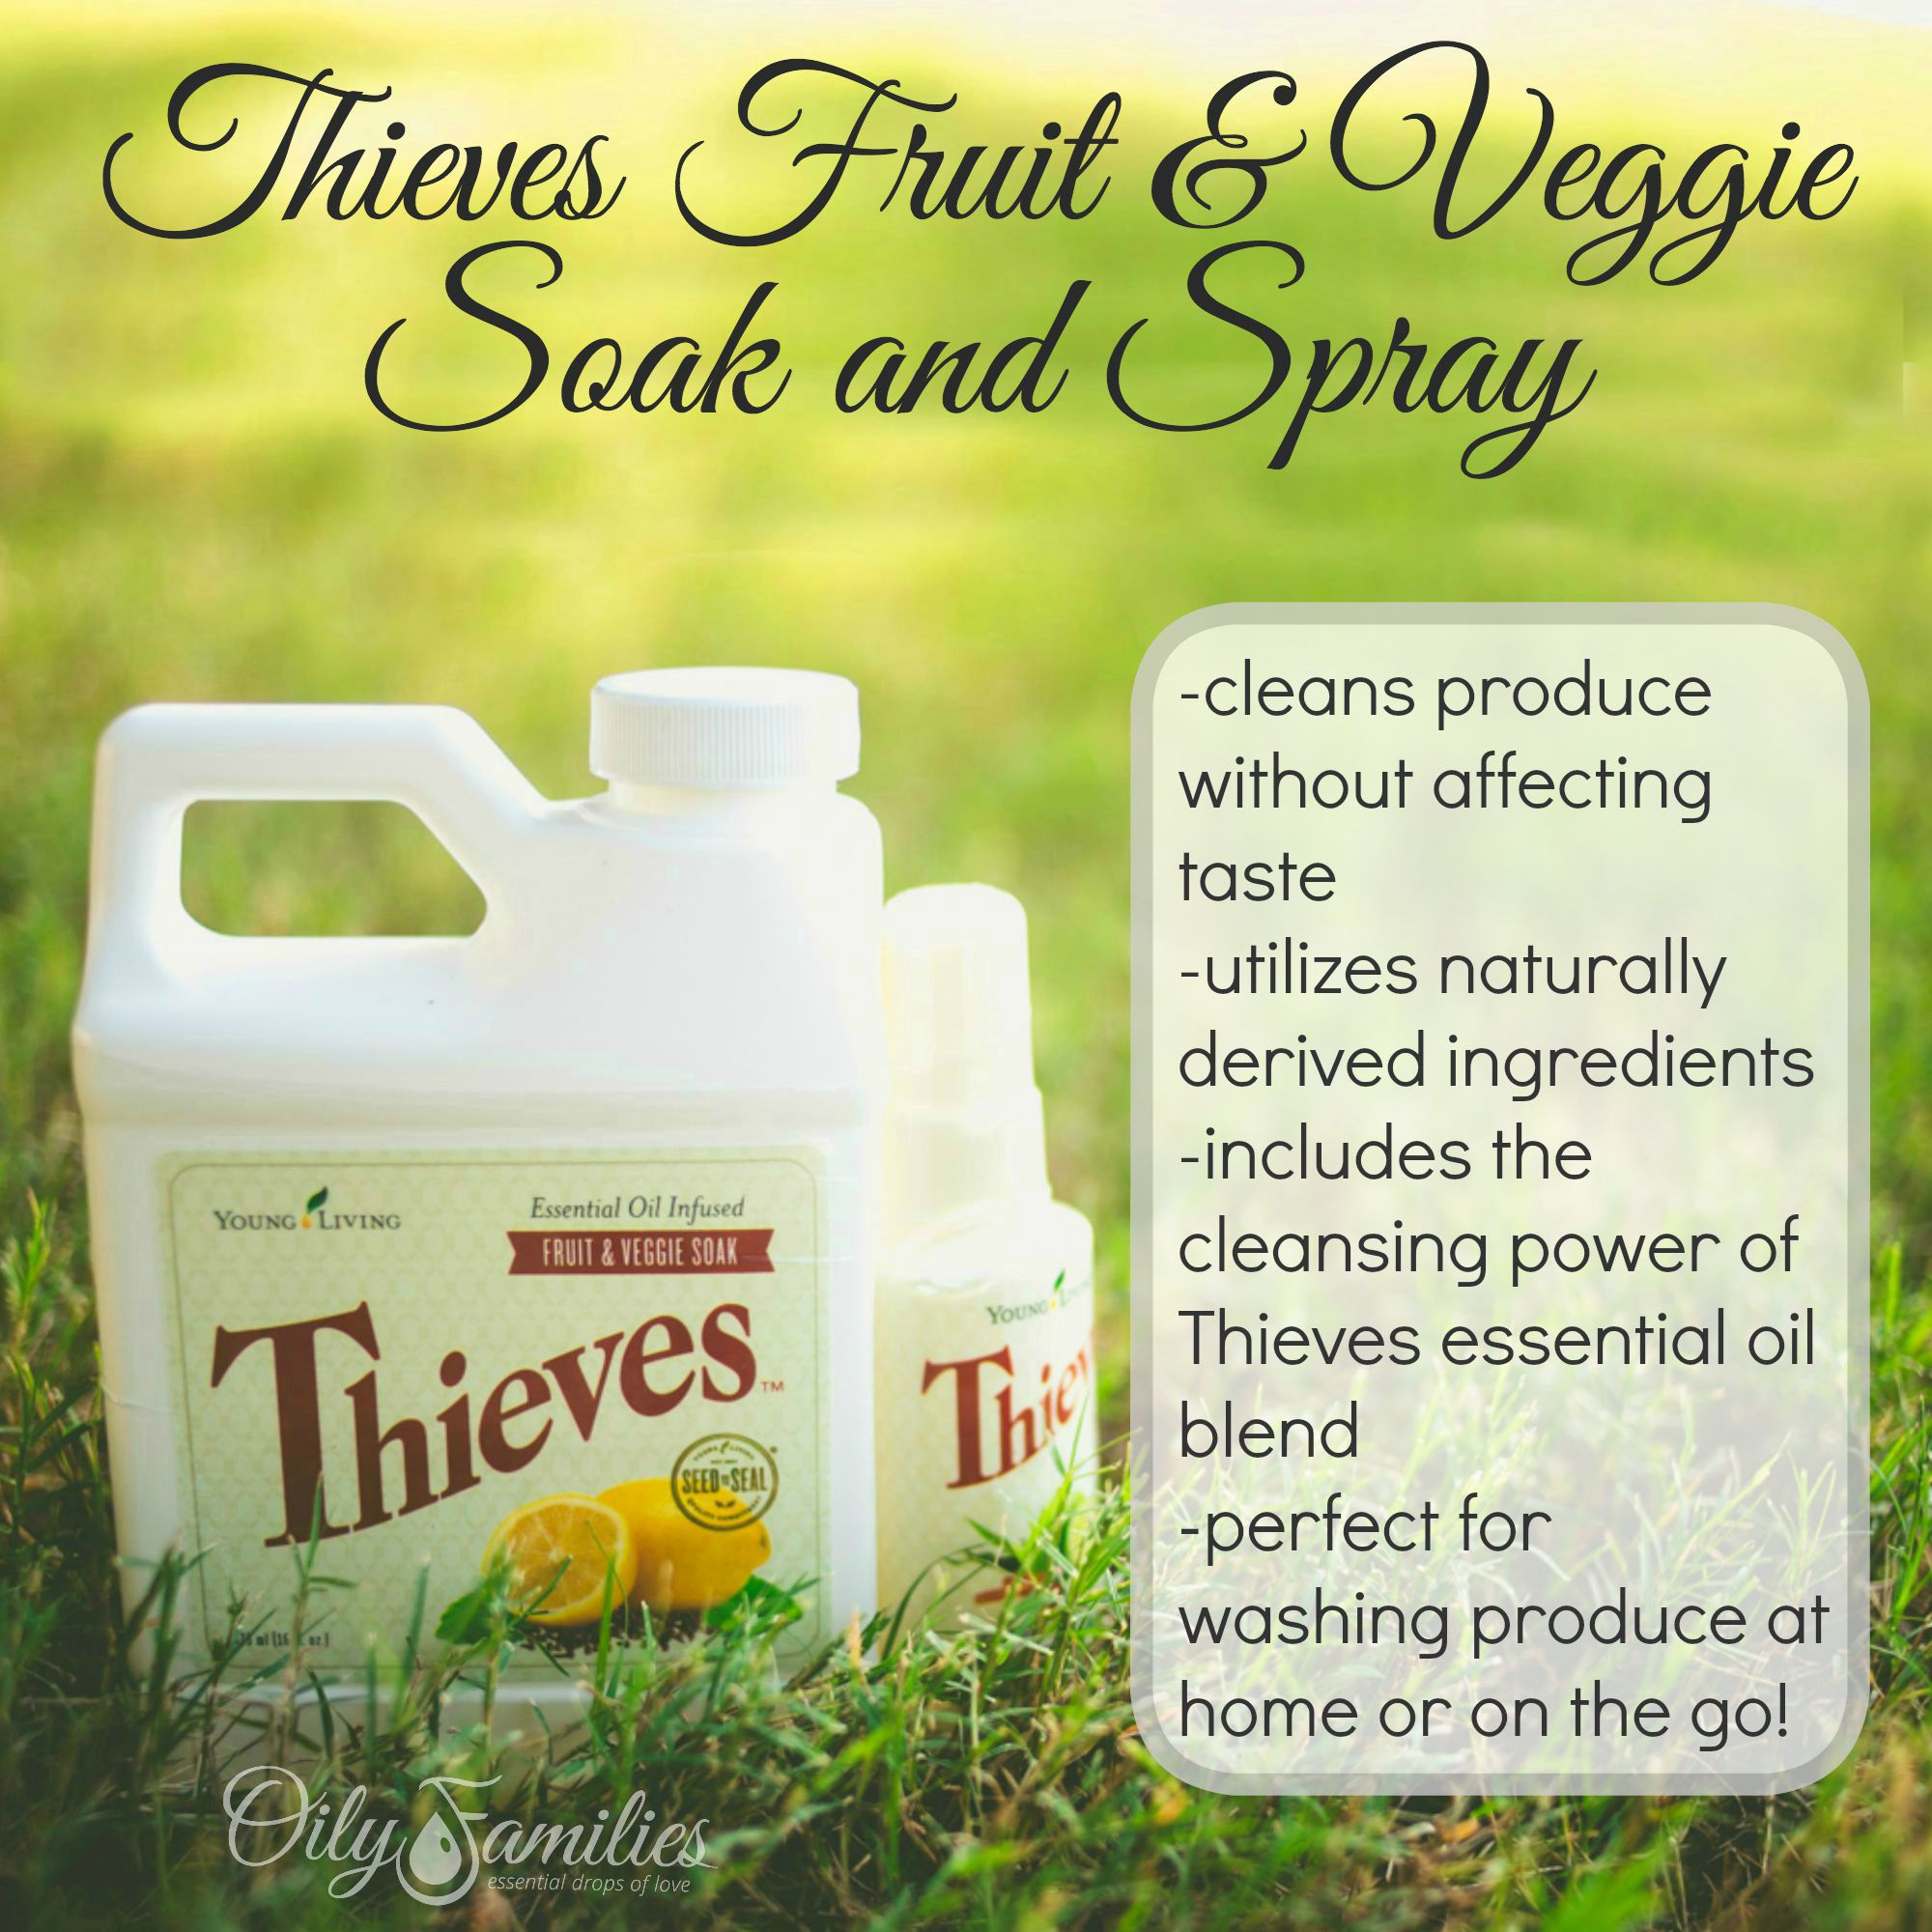 Thieves Fruit and Veggie Spray - no toxic chemicals!